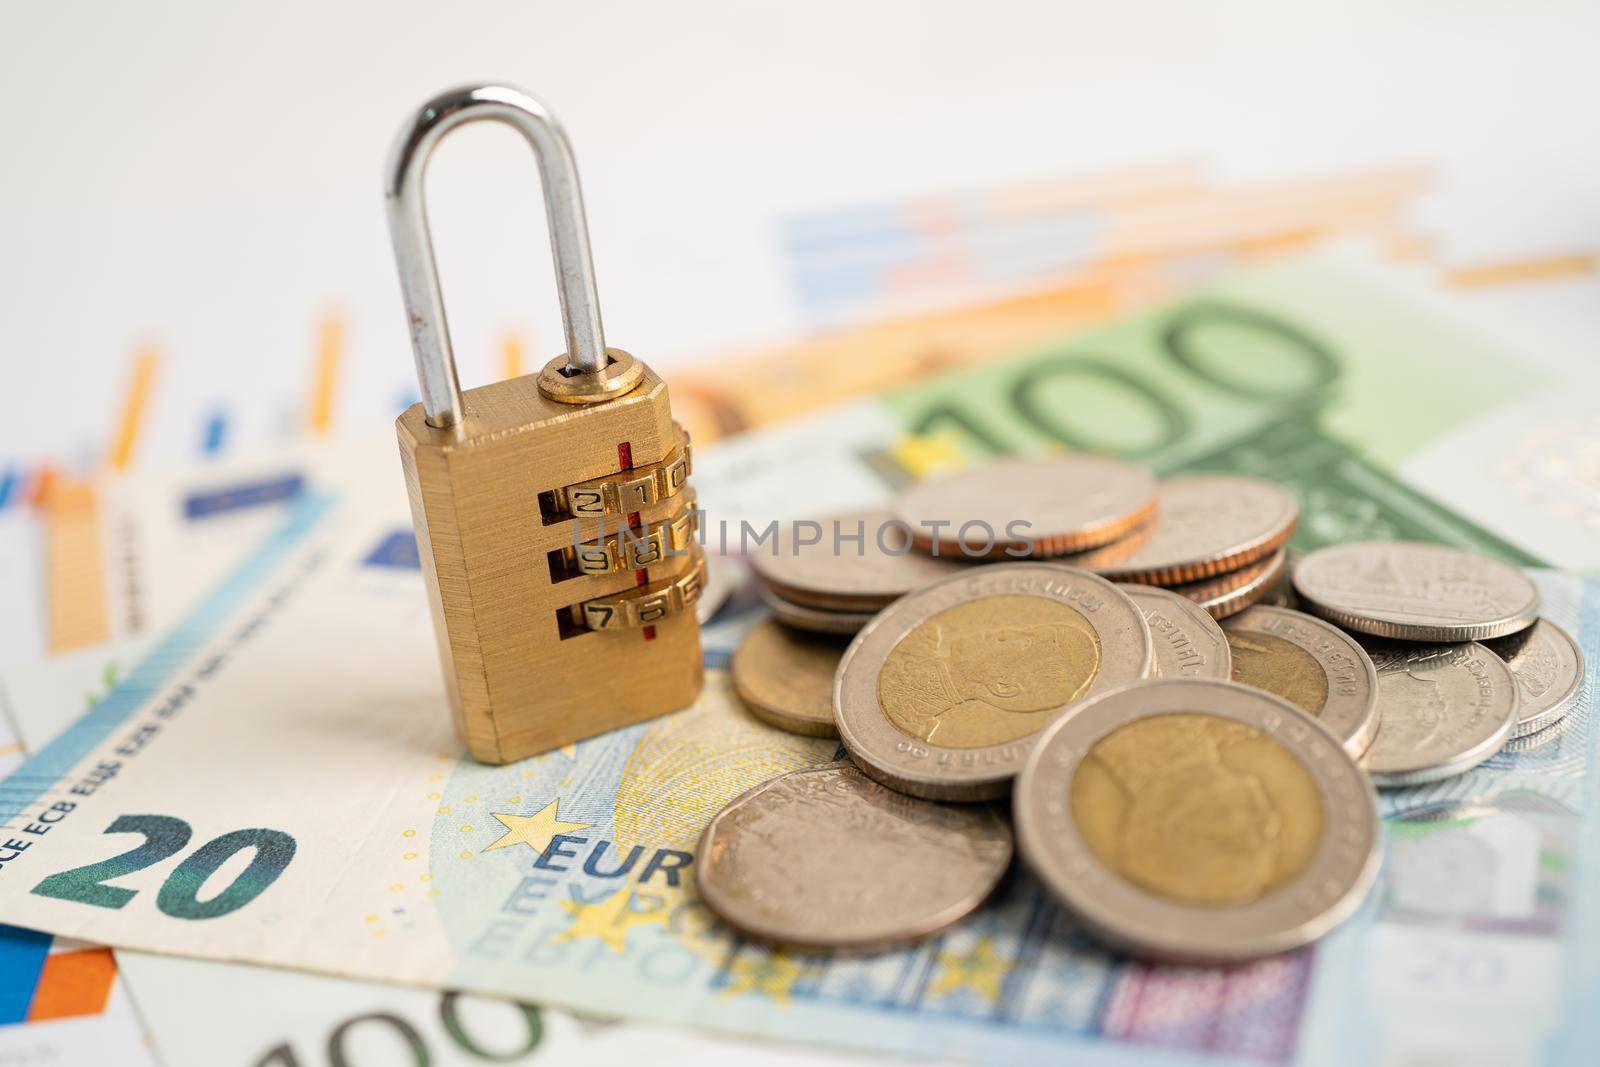 Golden security digital password lock key and coins with with Euro banknotes on graph, trade finance concept.